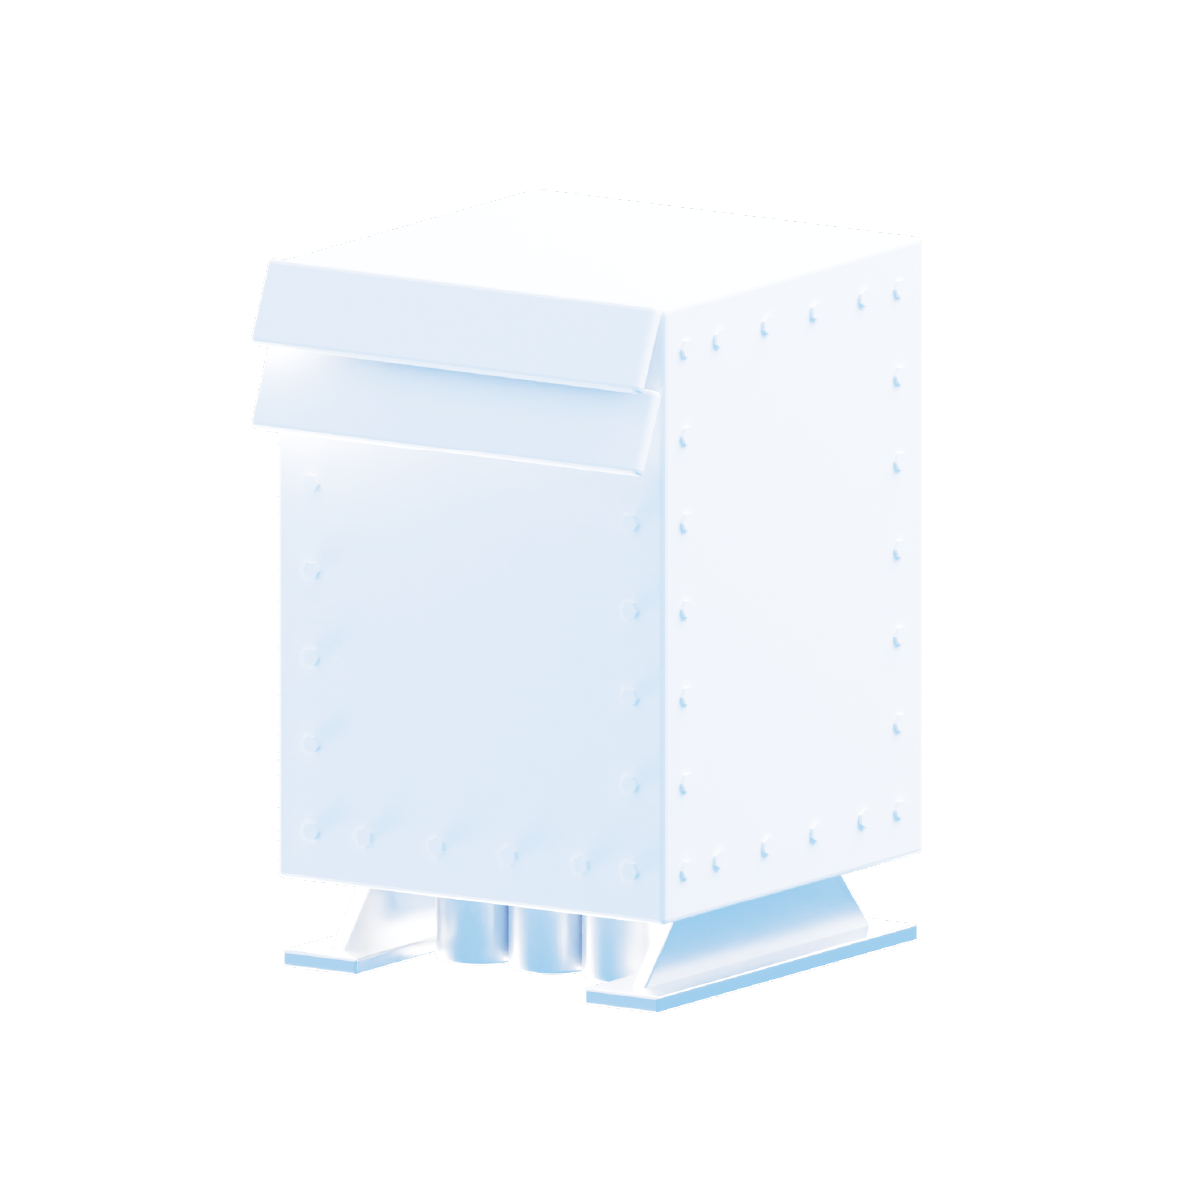 BATTERY PACK.png